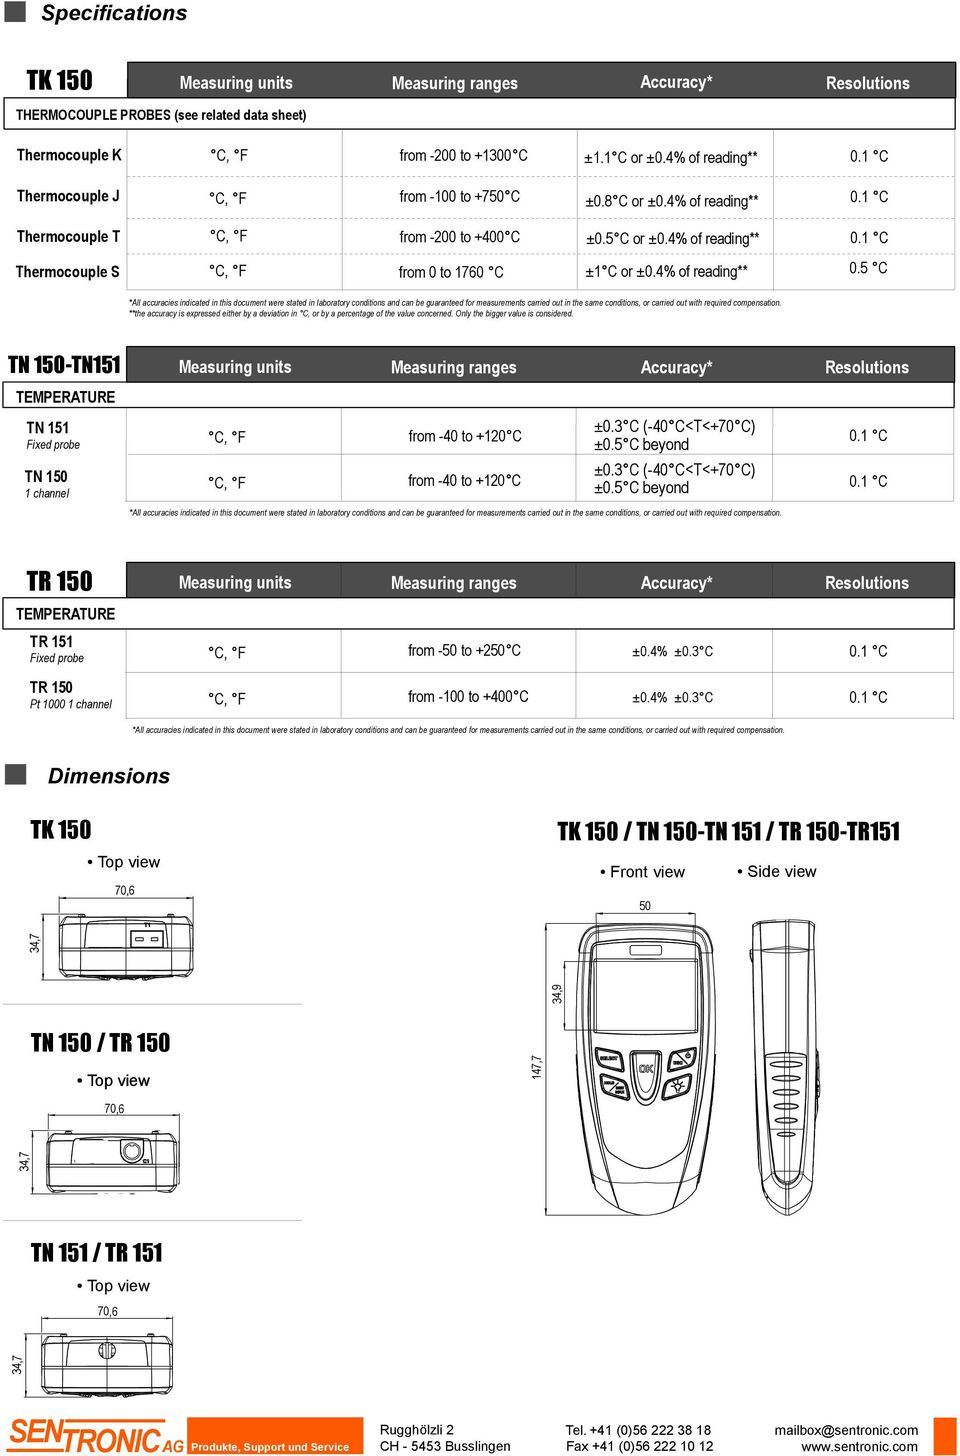 Only the bigger value is considered. TN 150-TN151 TEMPERATURE TN 151 Fixed probe TN 150 1 channel from -40 to +120 C from -40 to +120 C ±0.3 C (-40 C<T<+70 C) ±0.5 C beyond ±0.3 C (-40 C<T<+70 C) ±0.5 C beyond 0.